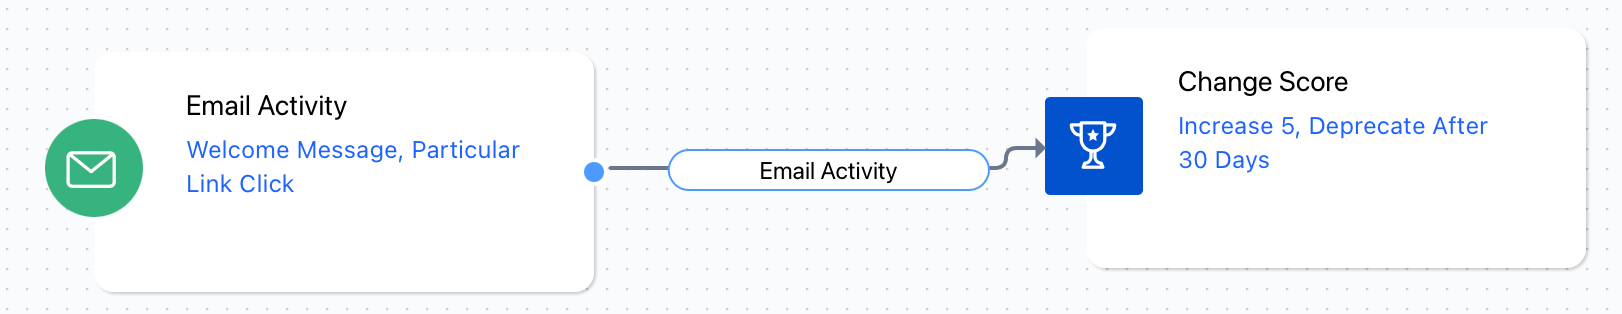 email_activity.png